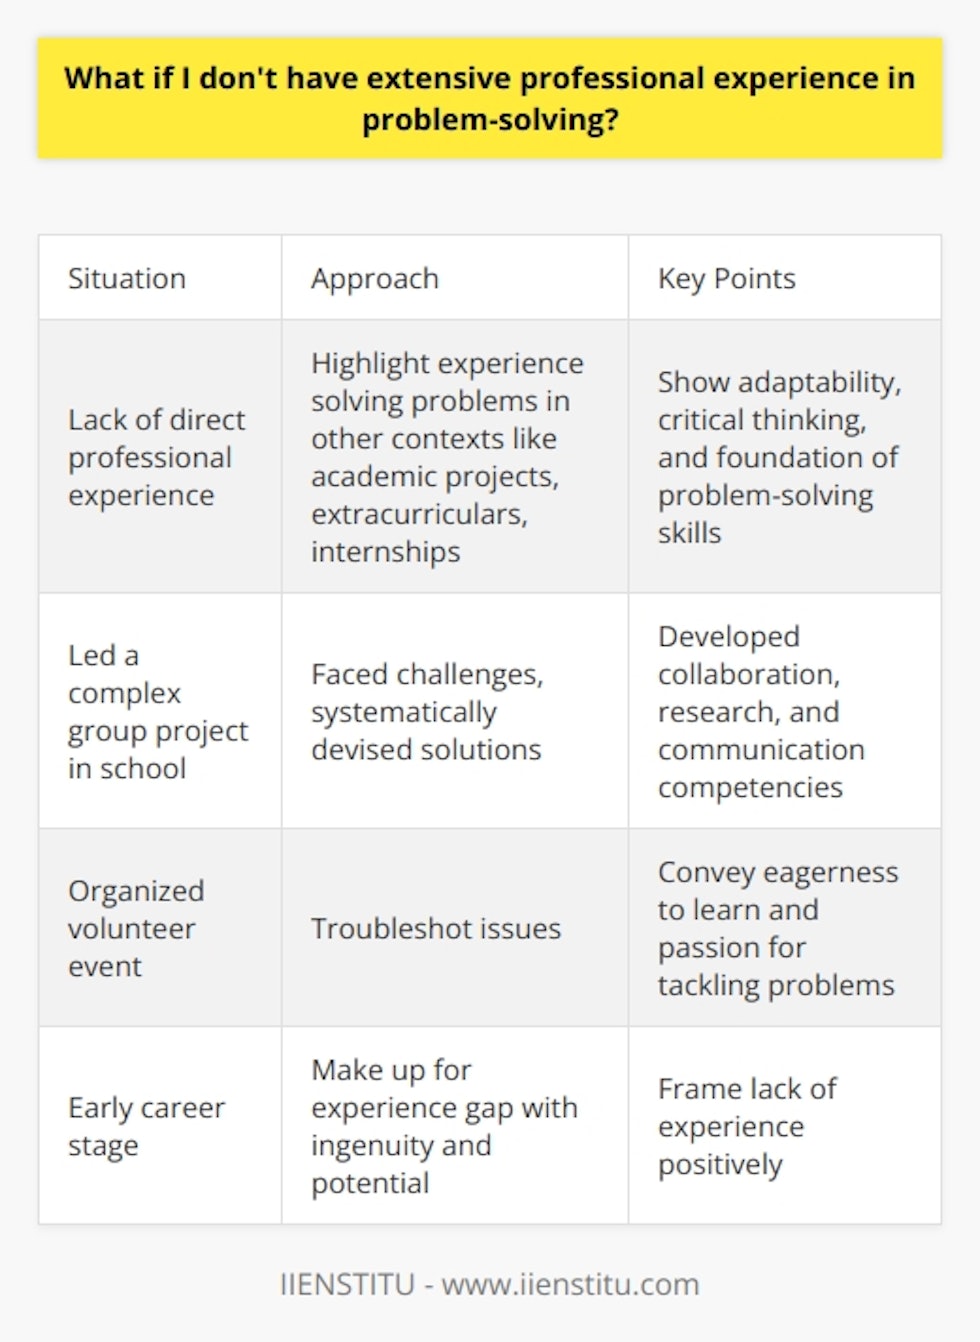 Here is some detailed content on what to focus on if you lack extensive professional experience in problem-solving:If you are just starting your career, it's understandable that you may not have years of professional experience solving complex problems in the workplace. However, that doesn't mean you lack relevant experience. Think creatively about times you have used problem-solving skills in other contexts like academic projects, extracurriculars, internships, or volunteer work. Highlight these experiences and draw connections to the skills needed for the job. For example, maybe you led a group project in school that required overcoming challenges and devising solutions. Or perhaps you organized a volunteer event that involved troubleshooting issues. Discuss the specific problems you faced, the systematic approach you took, the solutions you came up with, and the results you achieved. Emphasize how these experiences, while not traditional workplace scenarios, enabled you to develop critical thinking, research, collaboration, and communication skills. Show that you can apply these competencies to solve problems in new environments. Convey your passion for tackling challenges and your capacity to continuously learn and improve. With the right framing, you can assure employers that what you lack in direct experience, you make up for in the adaptability, ingenuity, and foundation of problem-solving abilities that will enable you to thrive in the role. Highlight your potential and eagerness to gain more on-the-job experience with their organization.